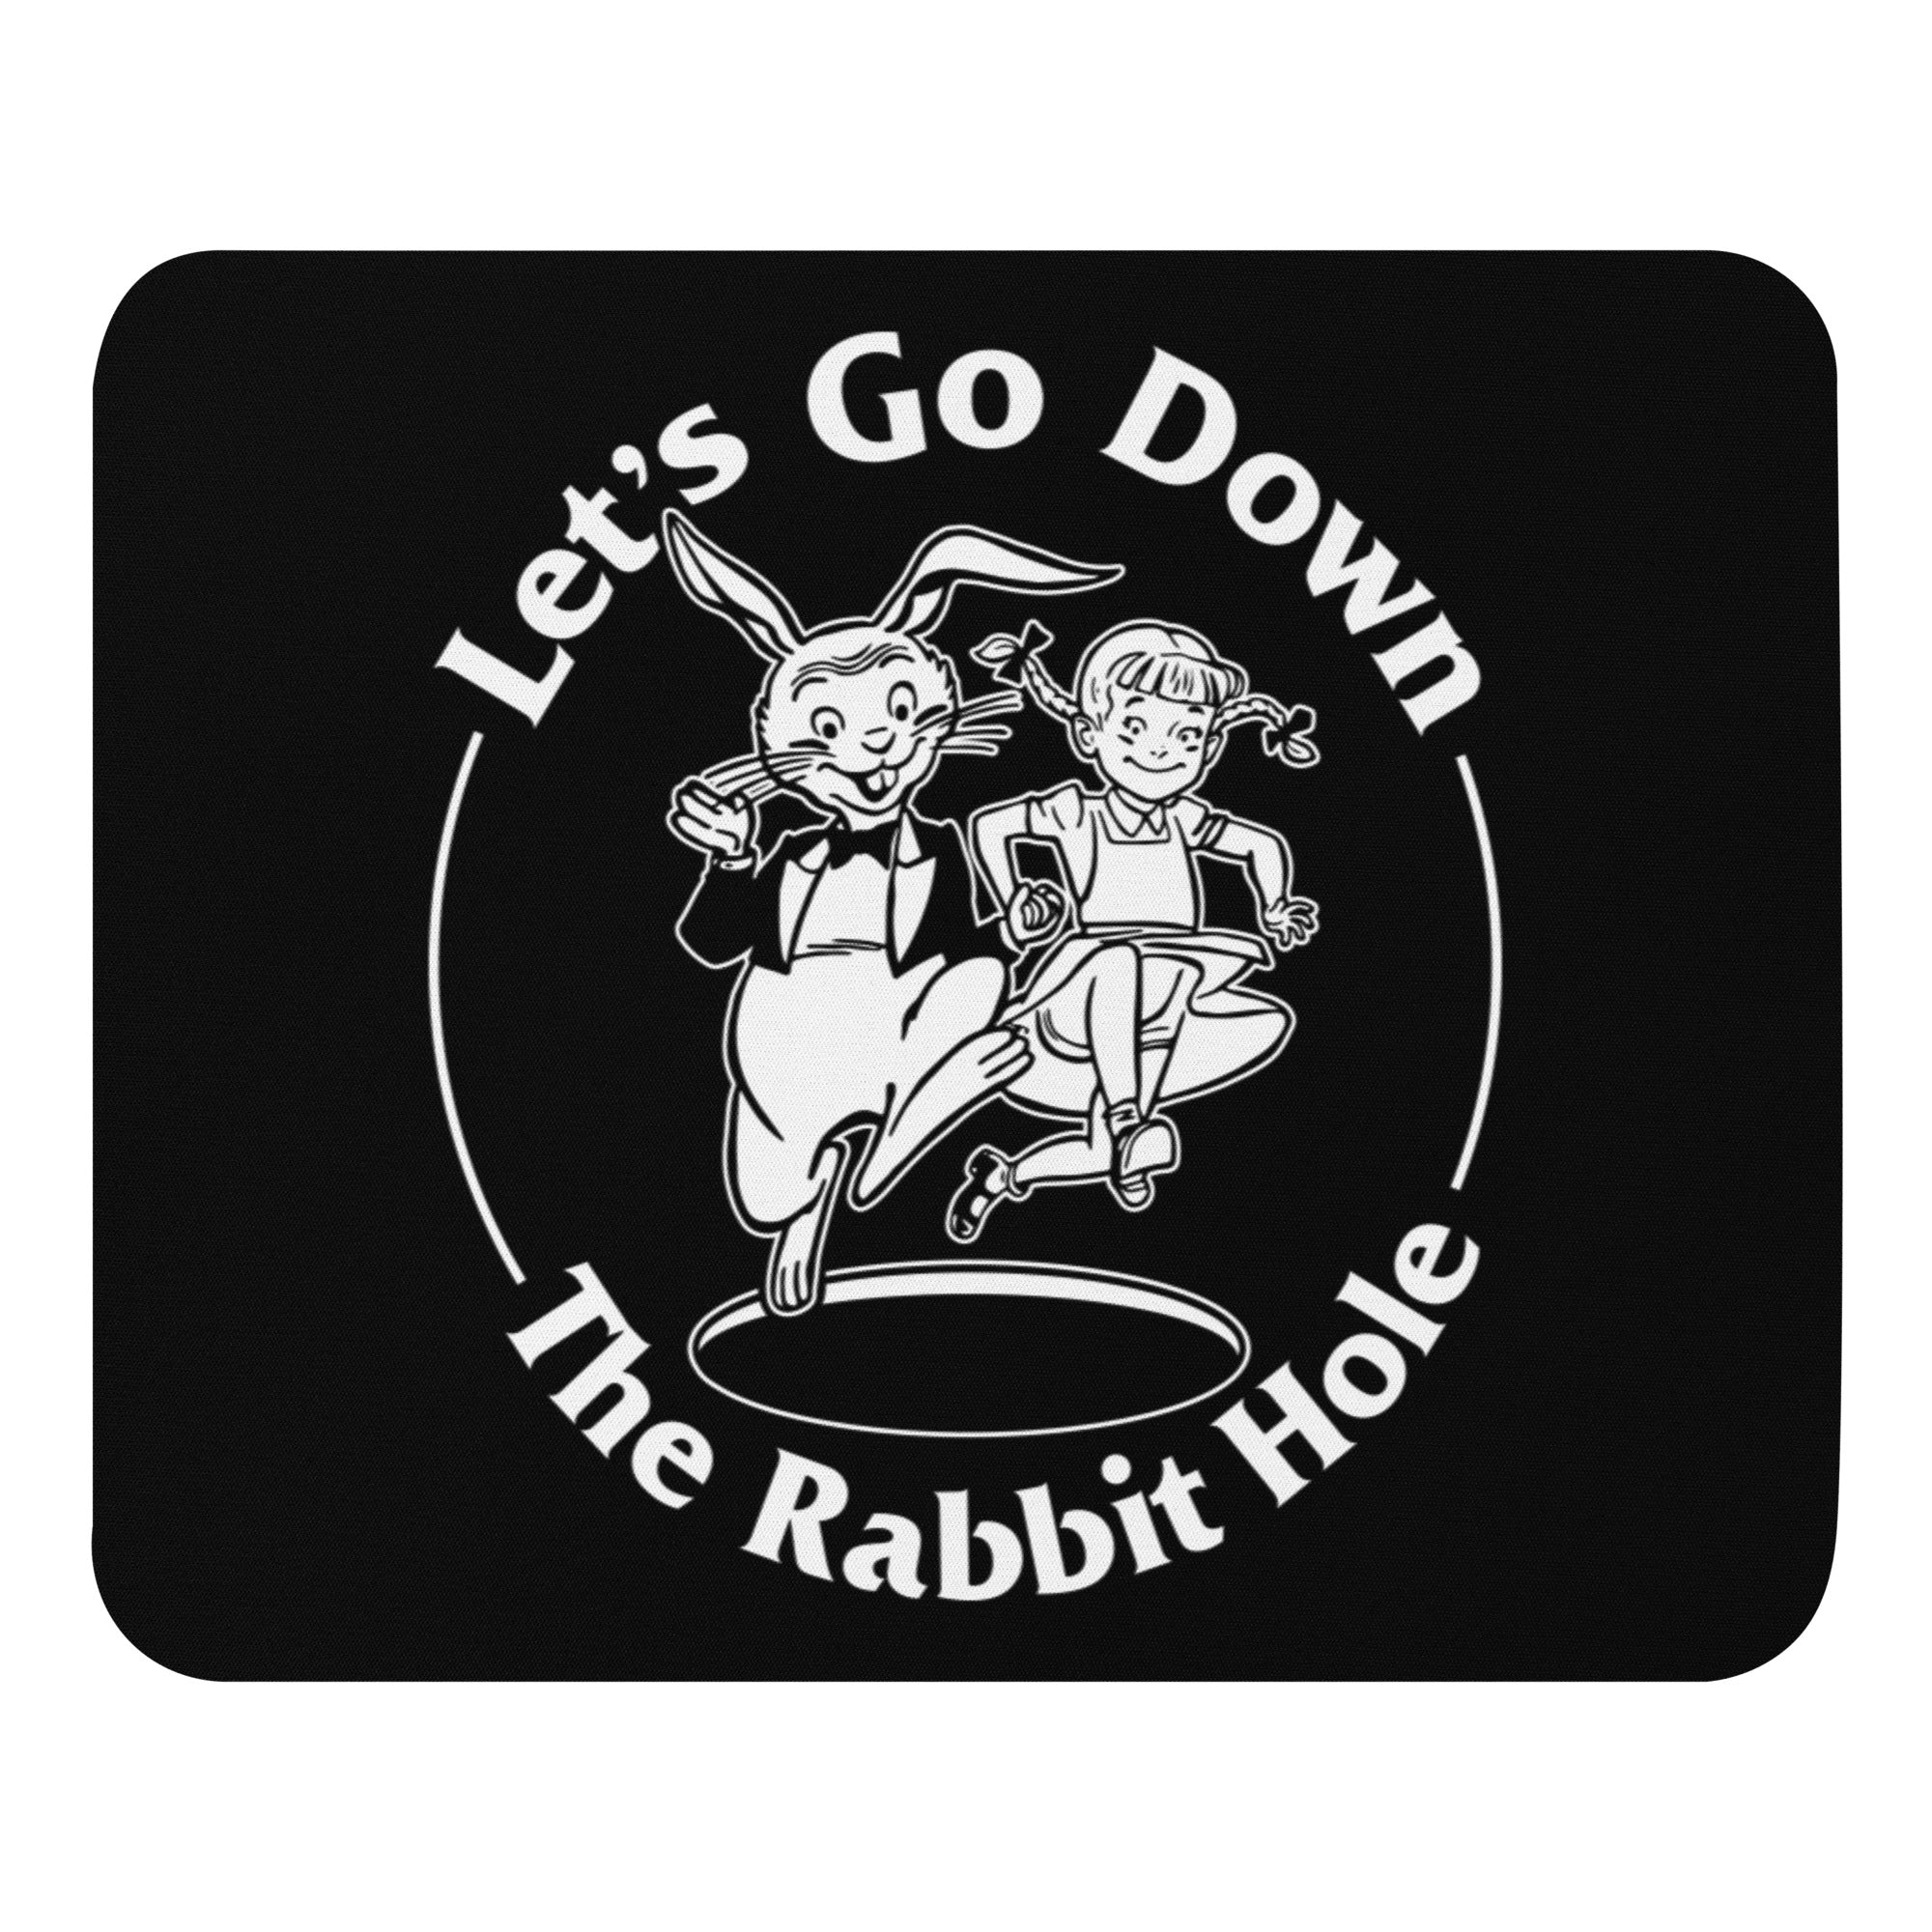 Let's Go Down the Rabbit Hole Mouse pad